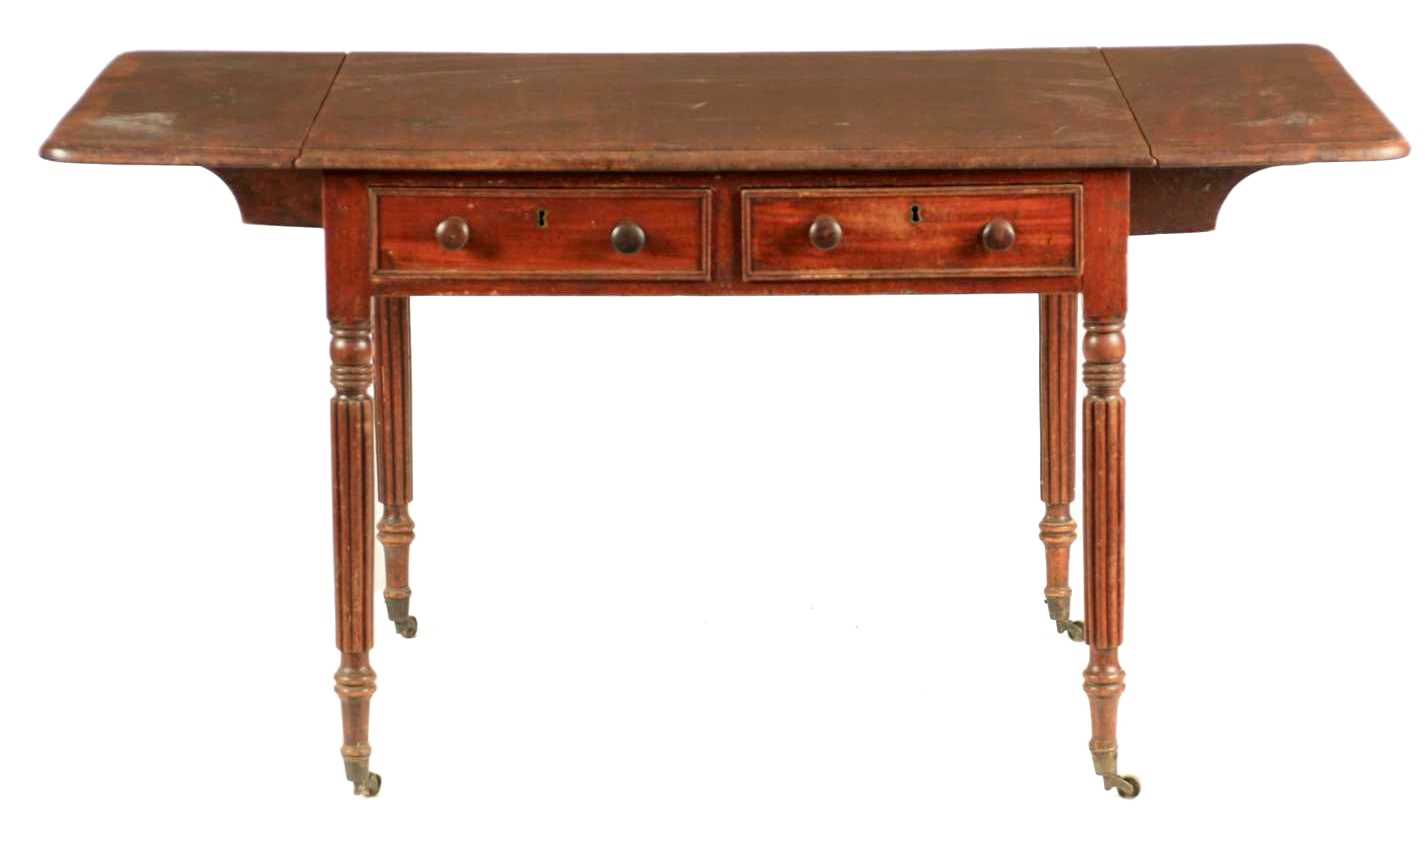 A GEORGE III MAHOGANY AND ROSEWOOD CROSSBANDED SOFA TABLE